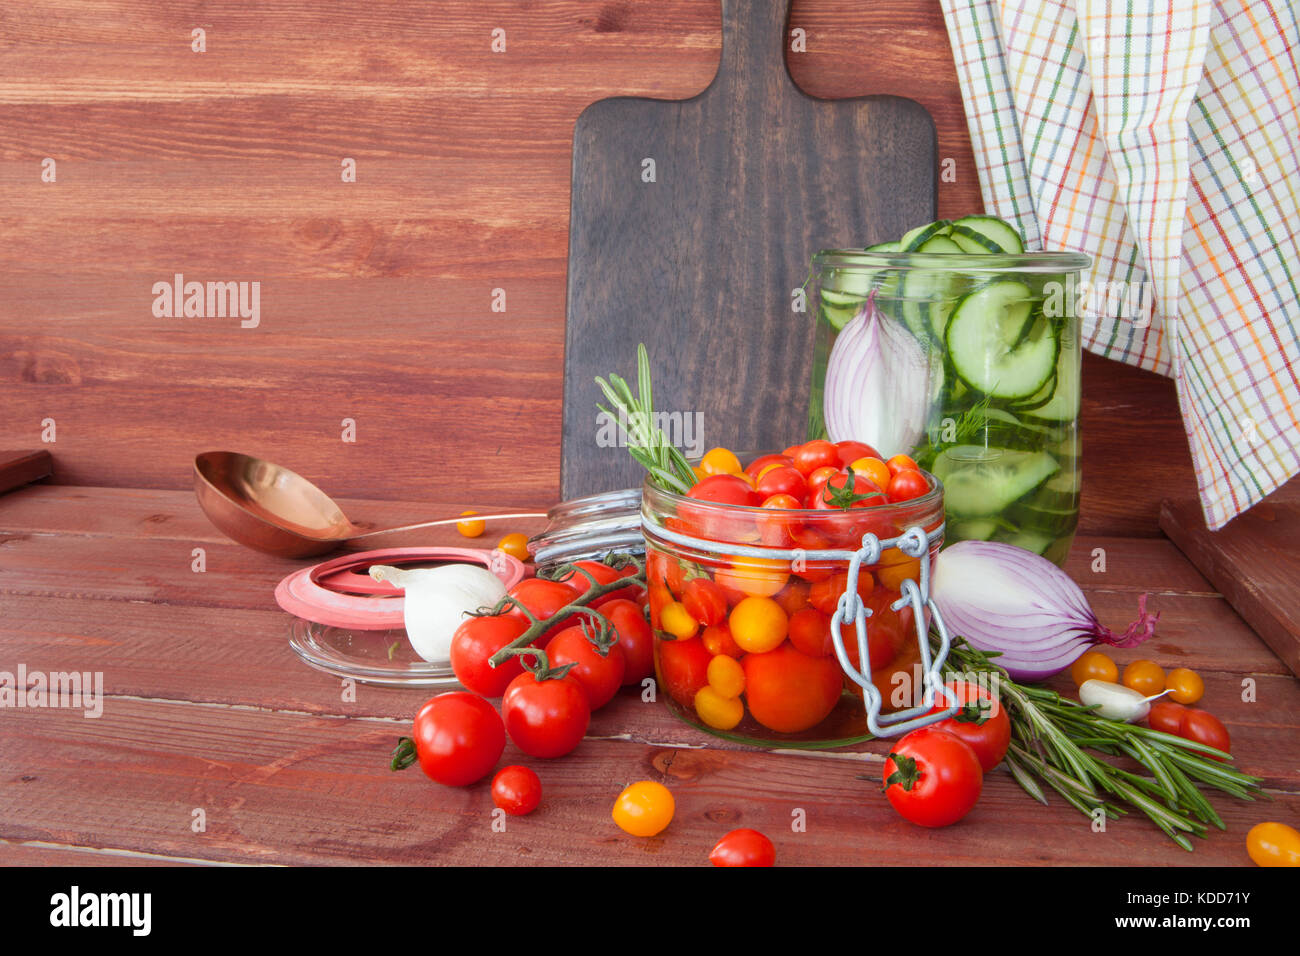 Pickling fresh vegetables with rosemary and garlic Stock Photo